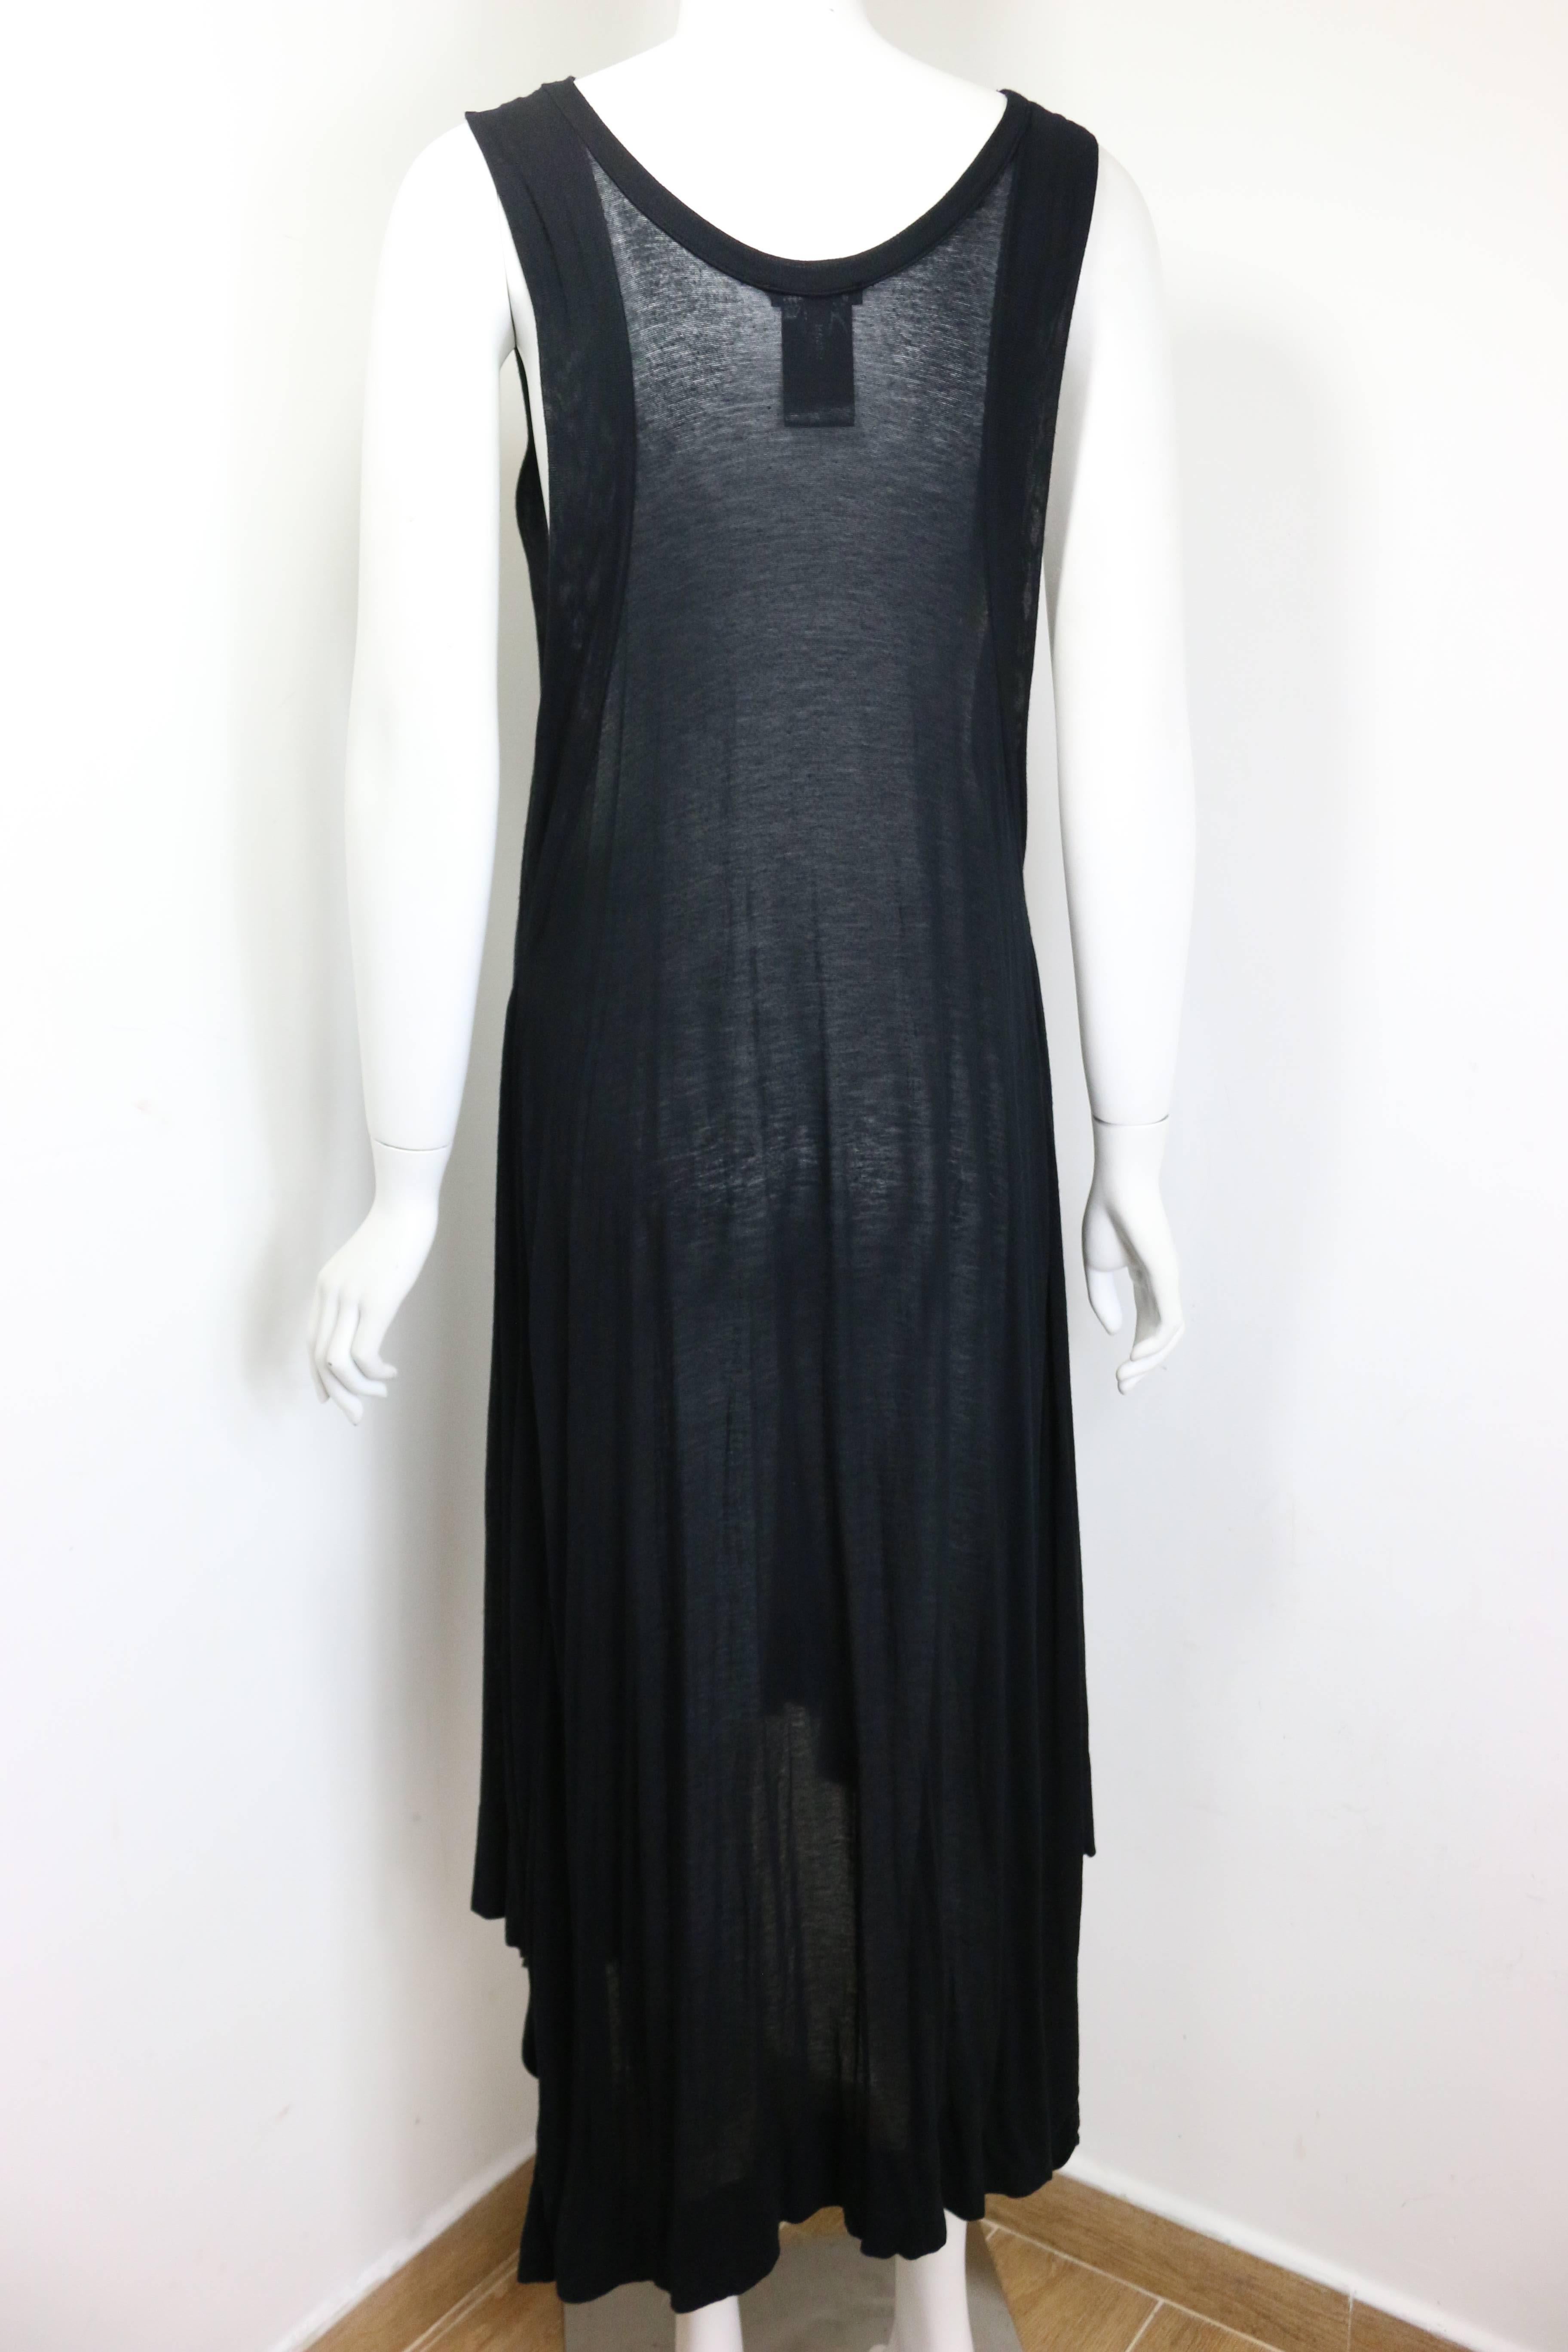 - Ann Demeulemeester black asymmetrical long dress. Featuring medium weight see through fabric with asymmetrical hem. Her signature style has always been consistently dark with a rock and roll touch in it. Timeless and unique! 

- Made in Italy. 

-